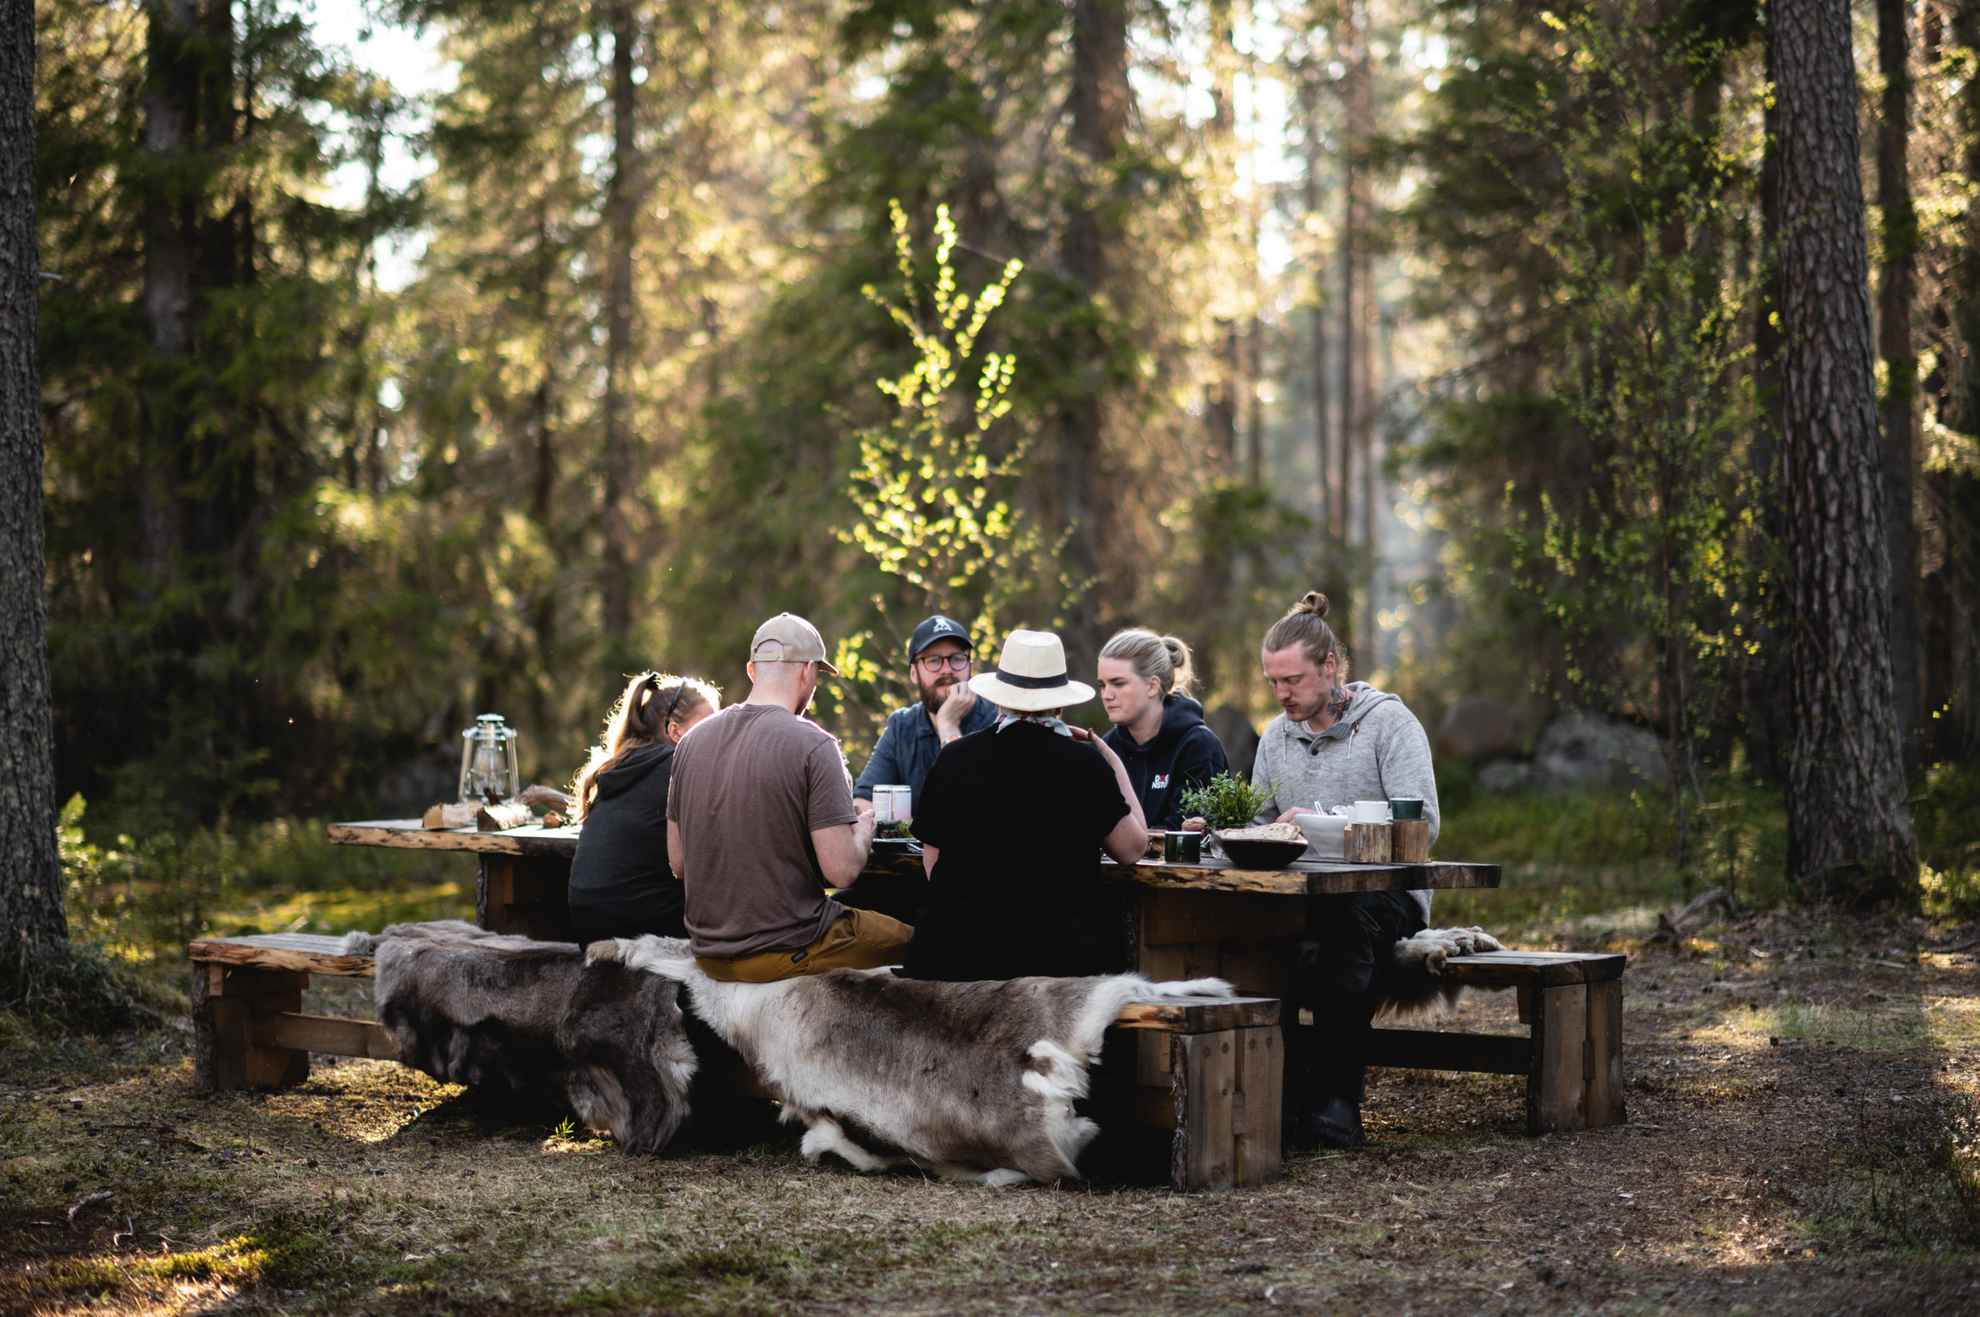 Six persons sitting at a wooden table in a forest. They are sitting on benches with sheep hides. The sun shines through the trees.